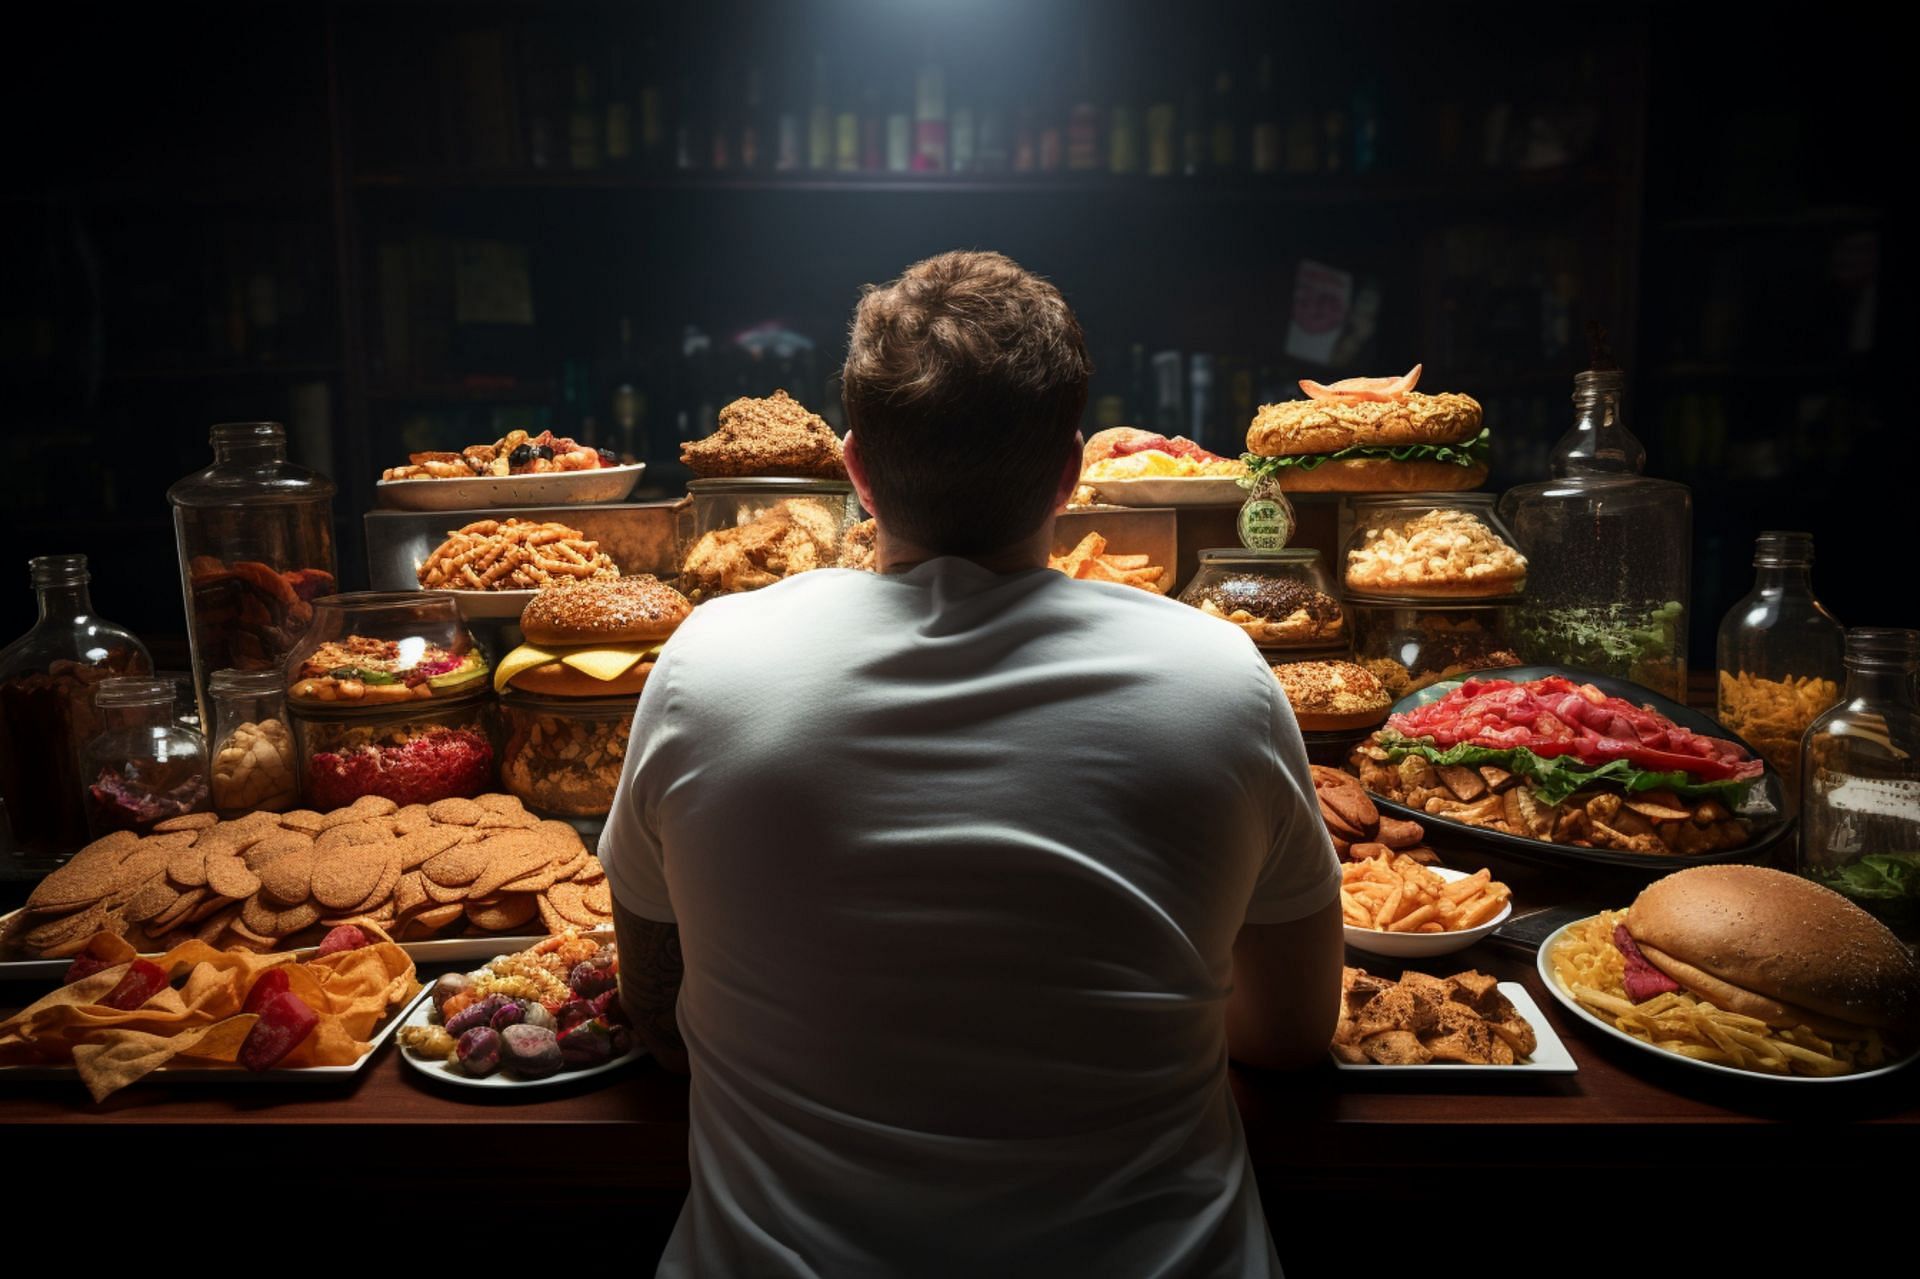 Our understanding of eating disorder in men is expanding slowly and steadily. (Image via Vecteezy/ Muhammad Shaoib)